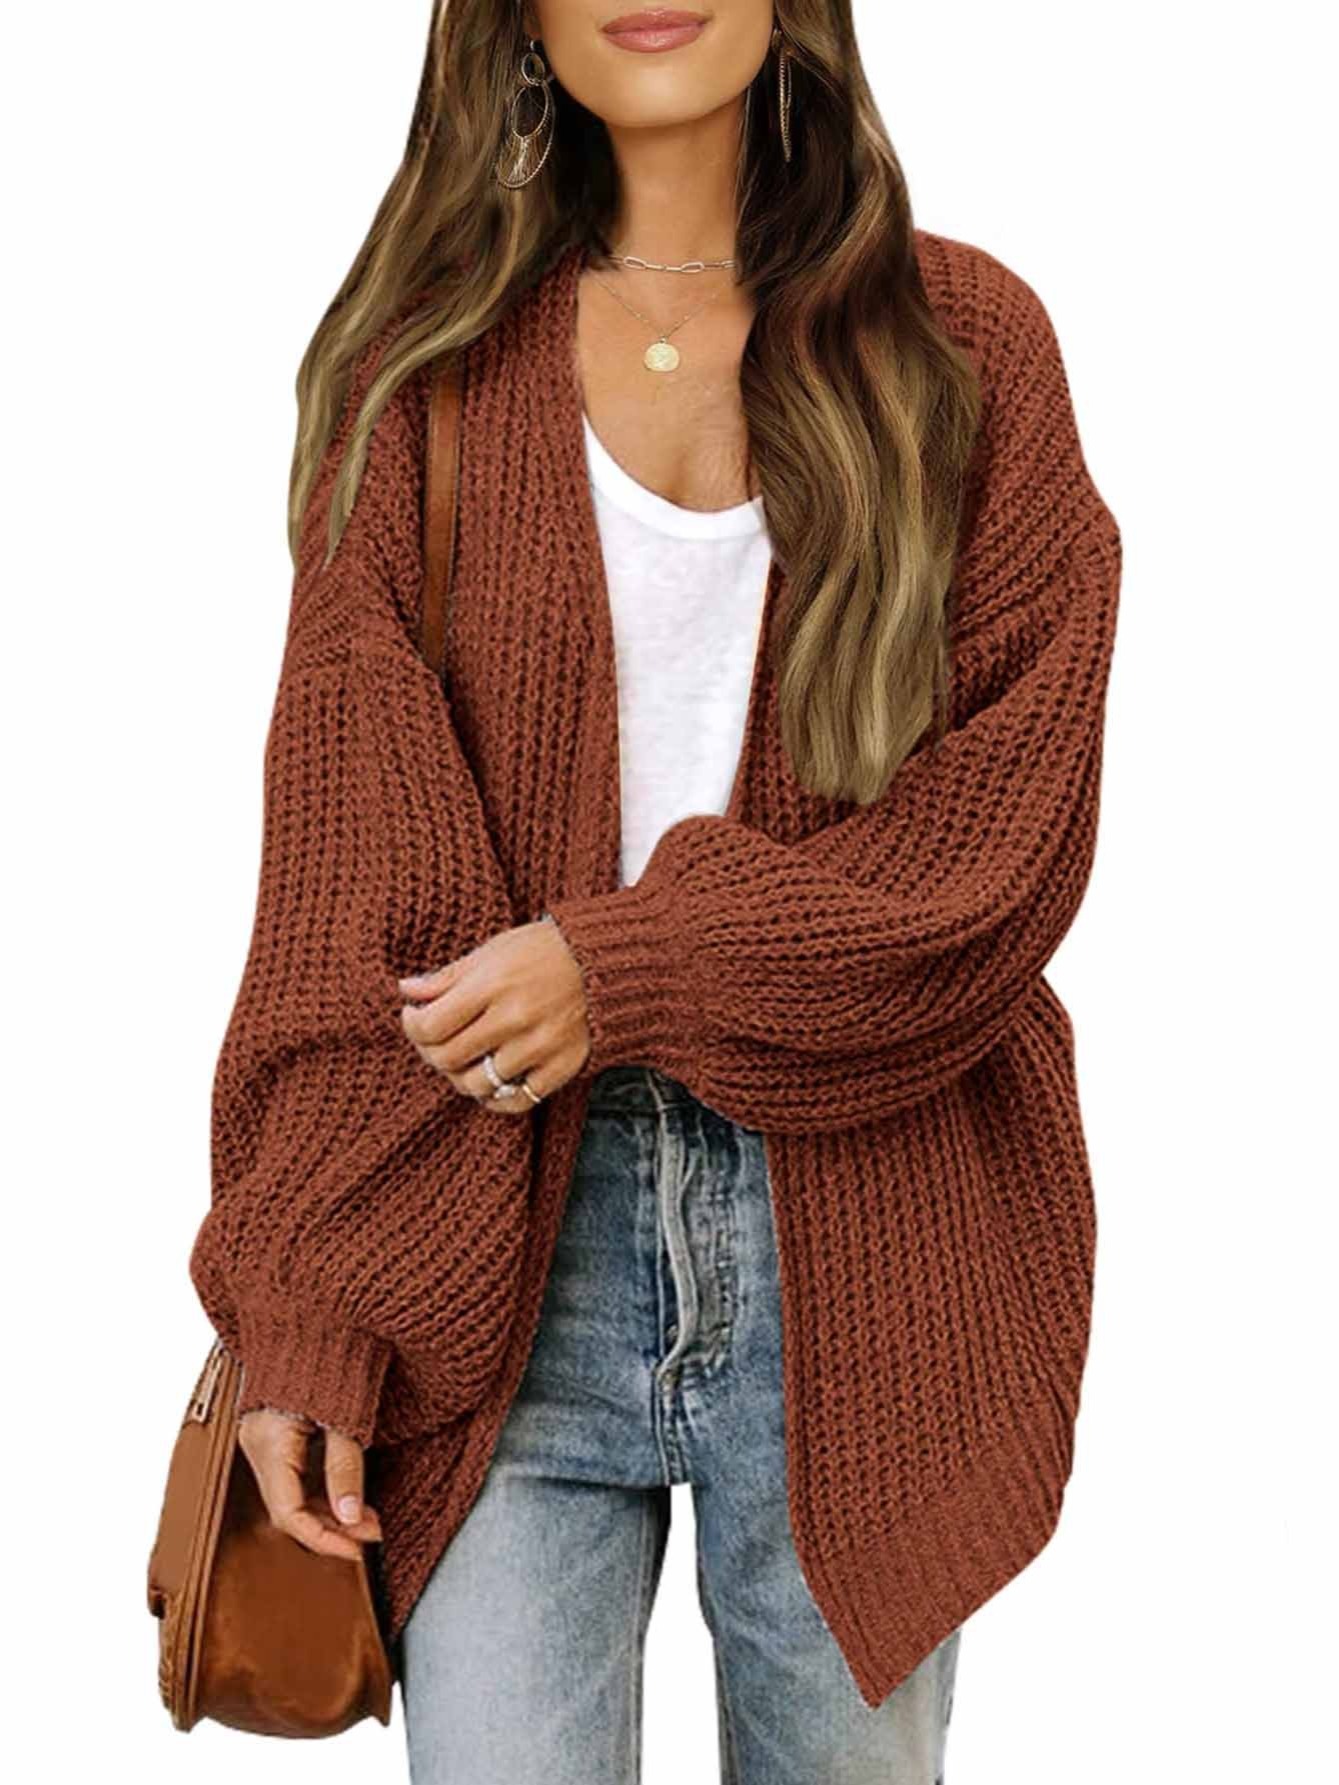 Knit Sweaters - Cardigans